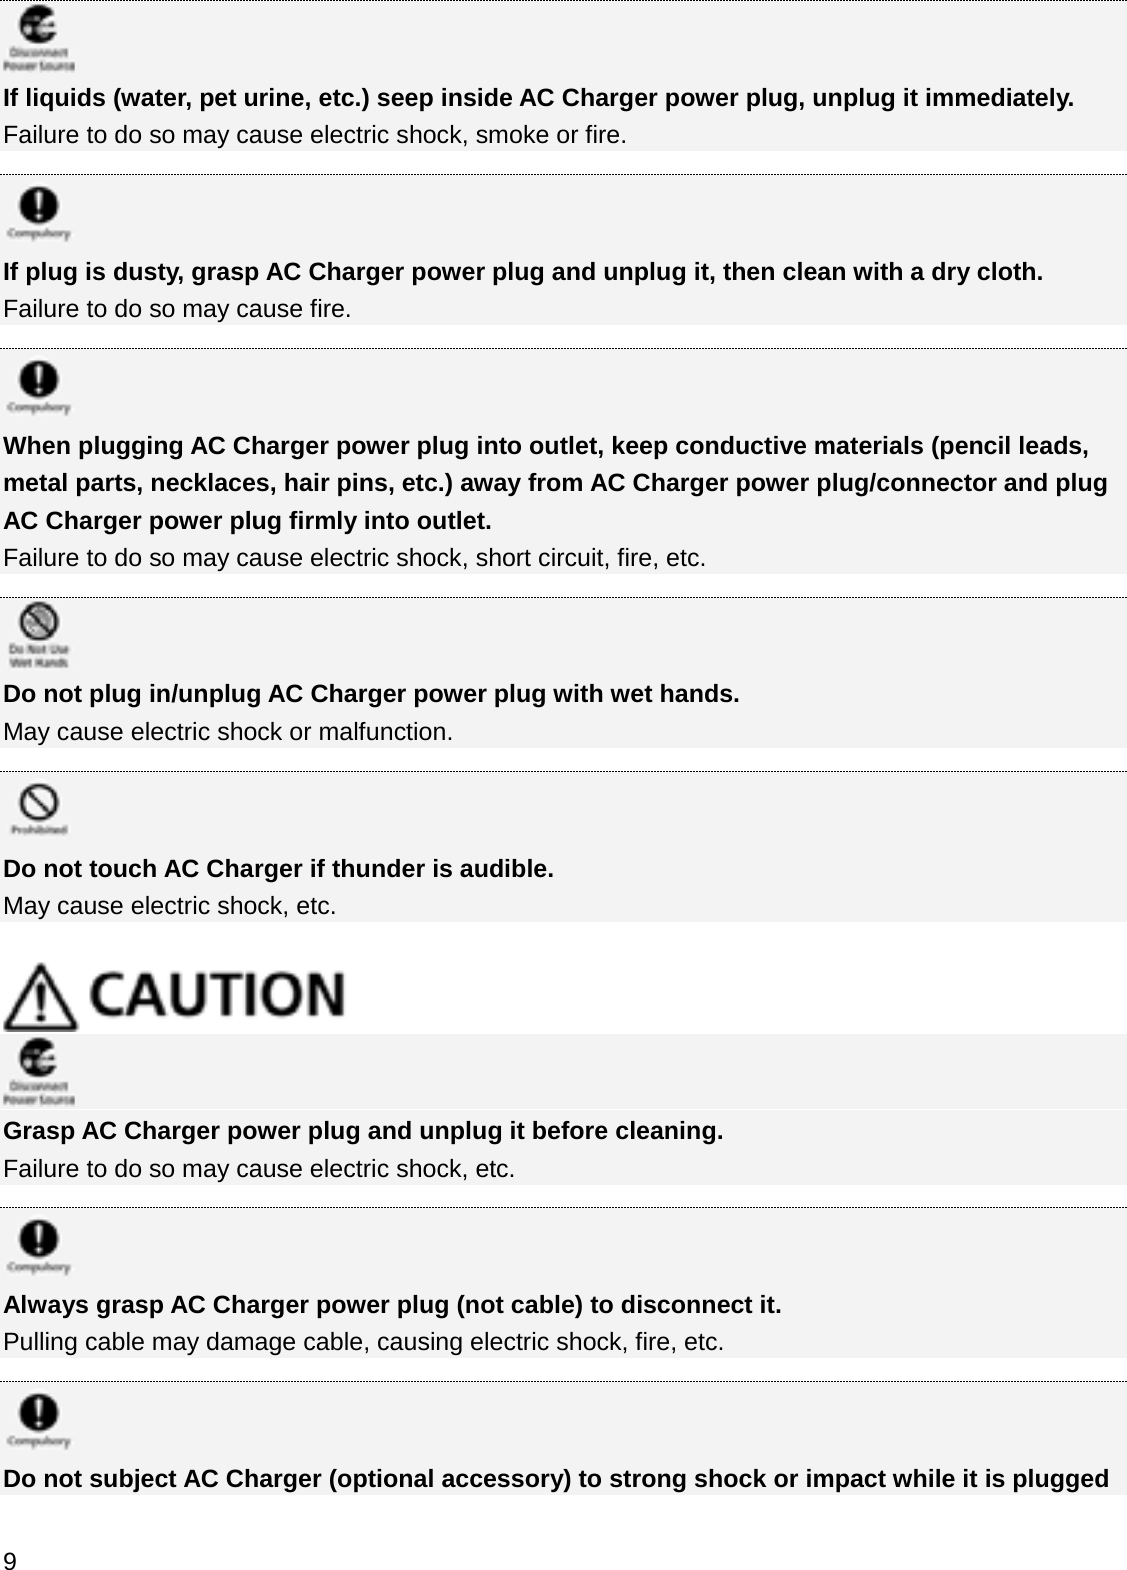 If liquids (water, pet urine, etc.) seep inside AC Charger power plug, unplug it immediately.Failure to do so may cause electric shock, smoke or fire.If plug is dusty, grasp AC Charger power plug and unplug it, then clean with a dry cloth.Failure to do so may cause fire.When plugging AC Charger power plug into outlet, keep conductive materials (pencil leads, metal parts, necklaces, hair pins, etc.) away from AC Charger power plug/connector and plug AC Charger power plug firmly into outlet.Failure to do so may cause electric shock, short circuit, fire, etc.Do not plug in/unplug AC Charger power plug with wet hands.May cause electric shock or malfunction.Do not touch AC Charger if thunder is audible.May cause electric shock, etc. Grasp AC Charger power plug and unplug it before cleaning.Failure to do so may cause electric shock, etc.Always grasp AC Charger power plug (not cable) to disconnect it.Pulling cable may damage cable, causing electric shock, fire, etc.Do not subject AC Charger (optional accessory) to strong shock or impact while it is plugged 9